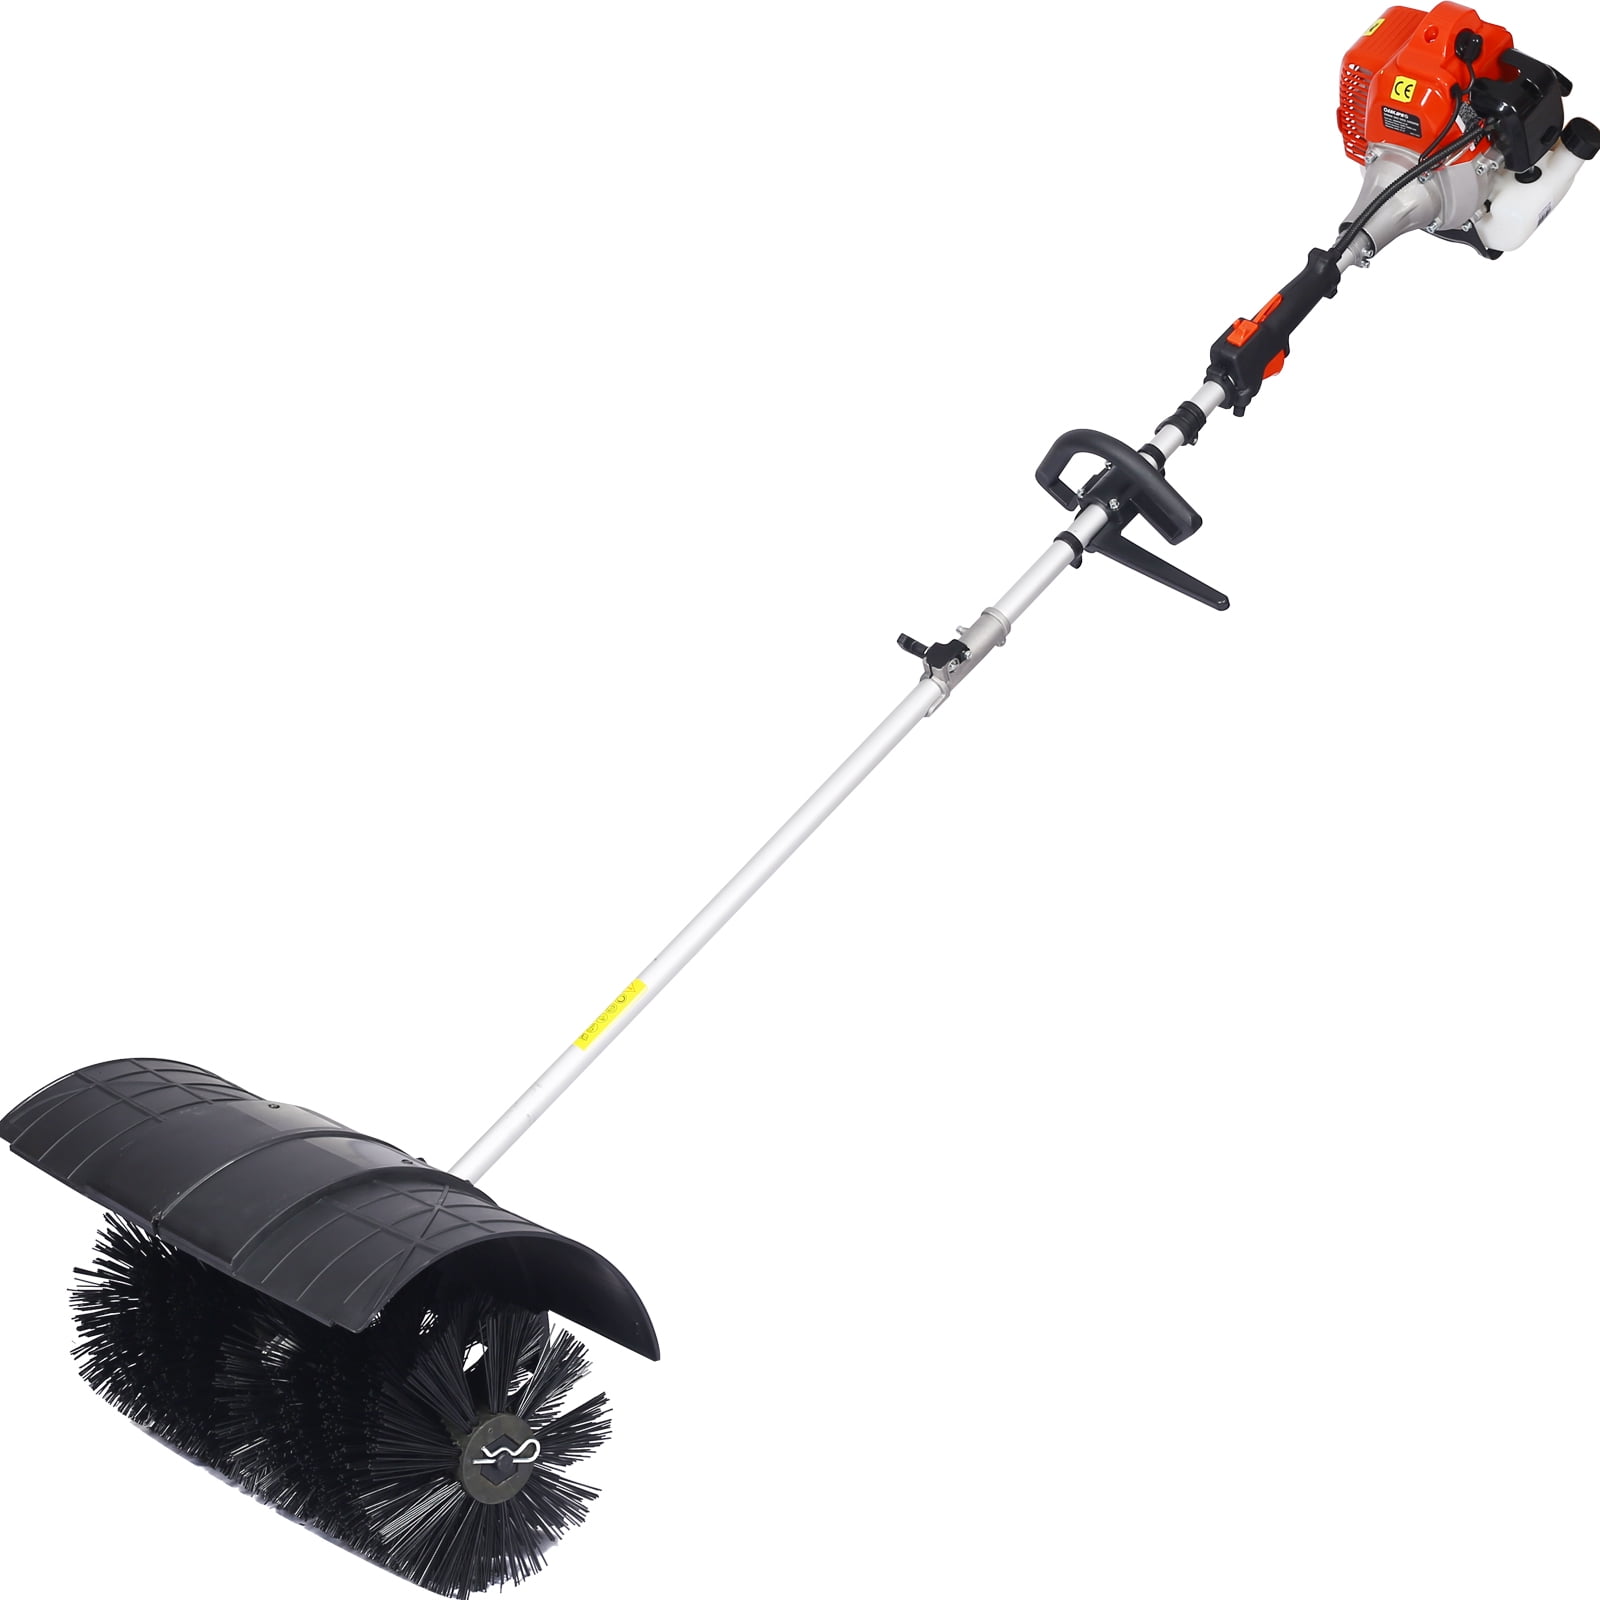 Gtech SW02 Advanced Cordless Sweeper - Free Delivery - Crosscraft